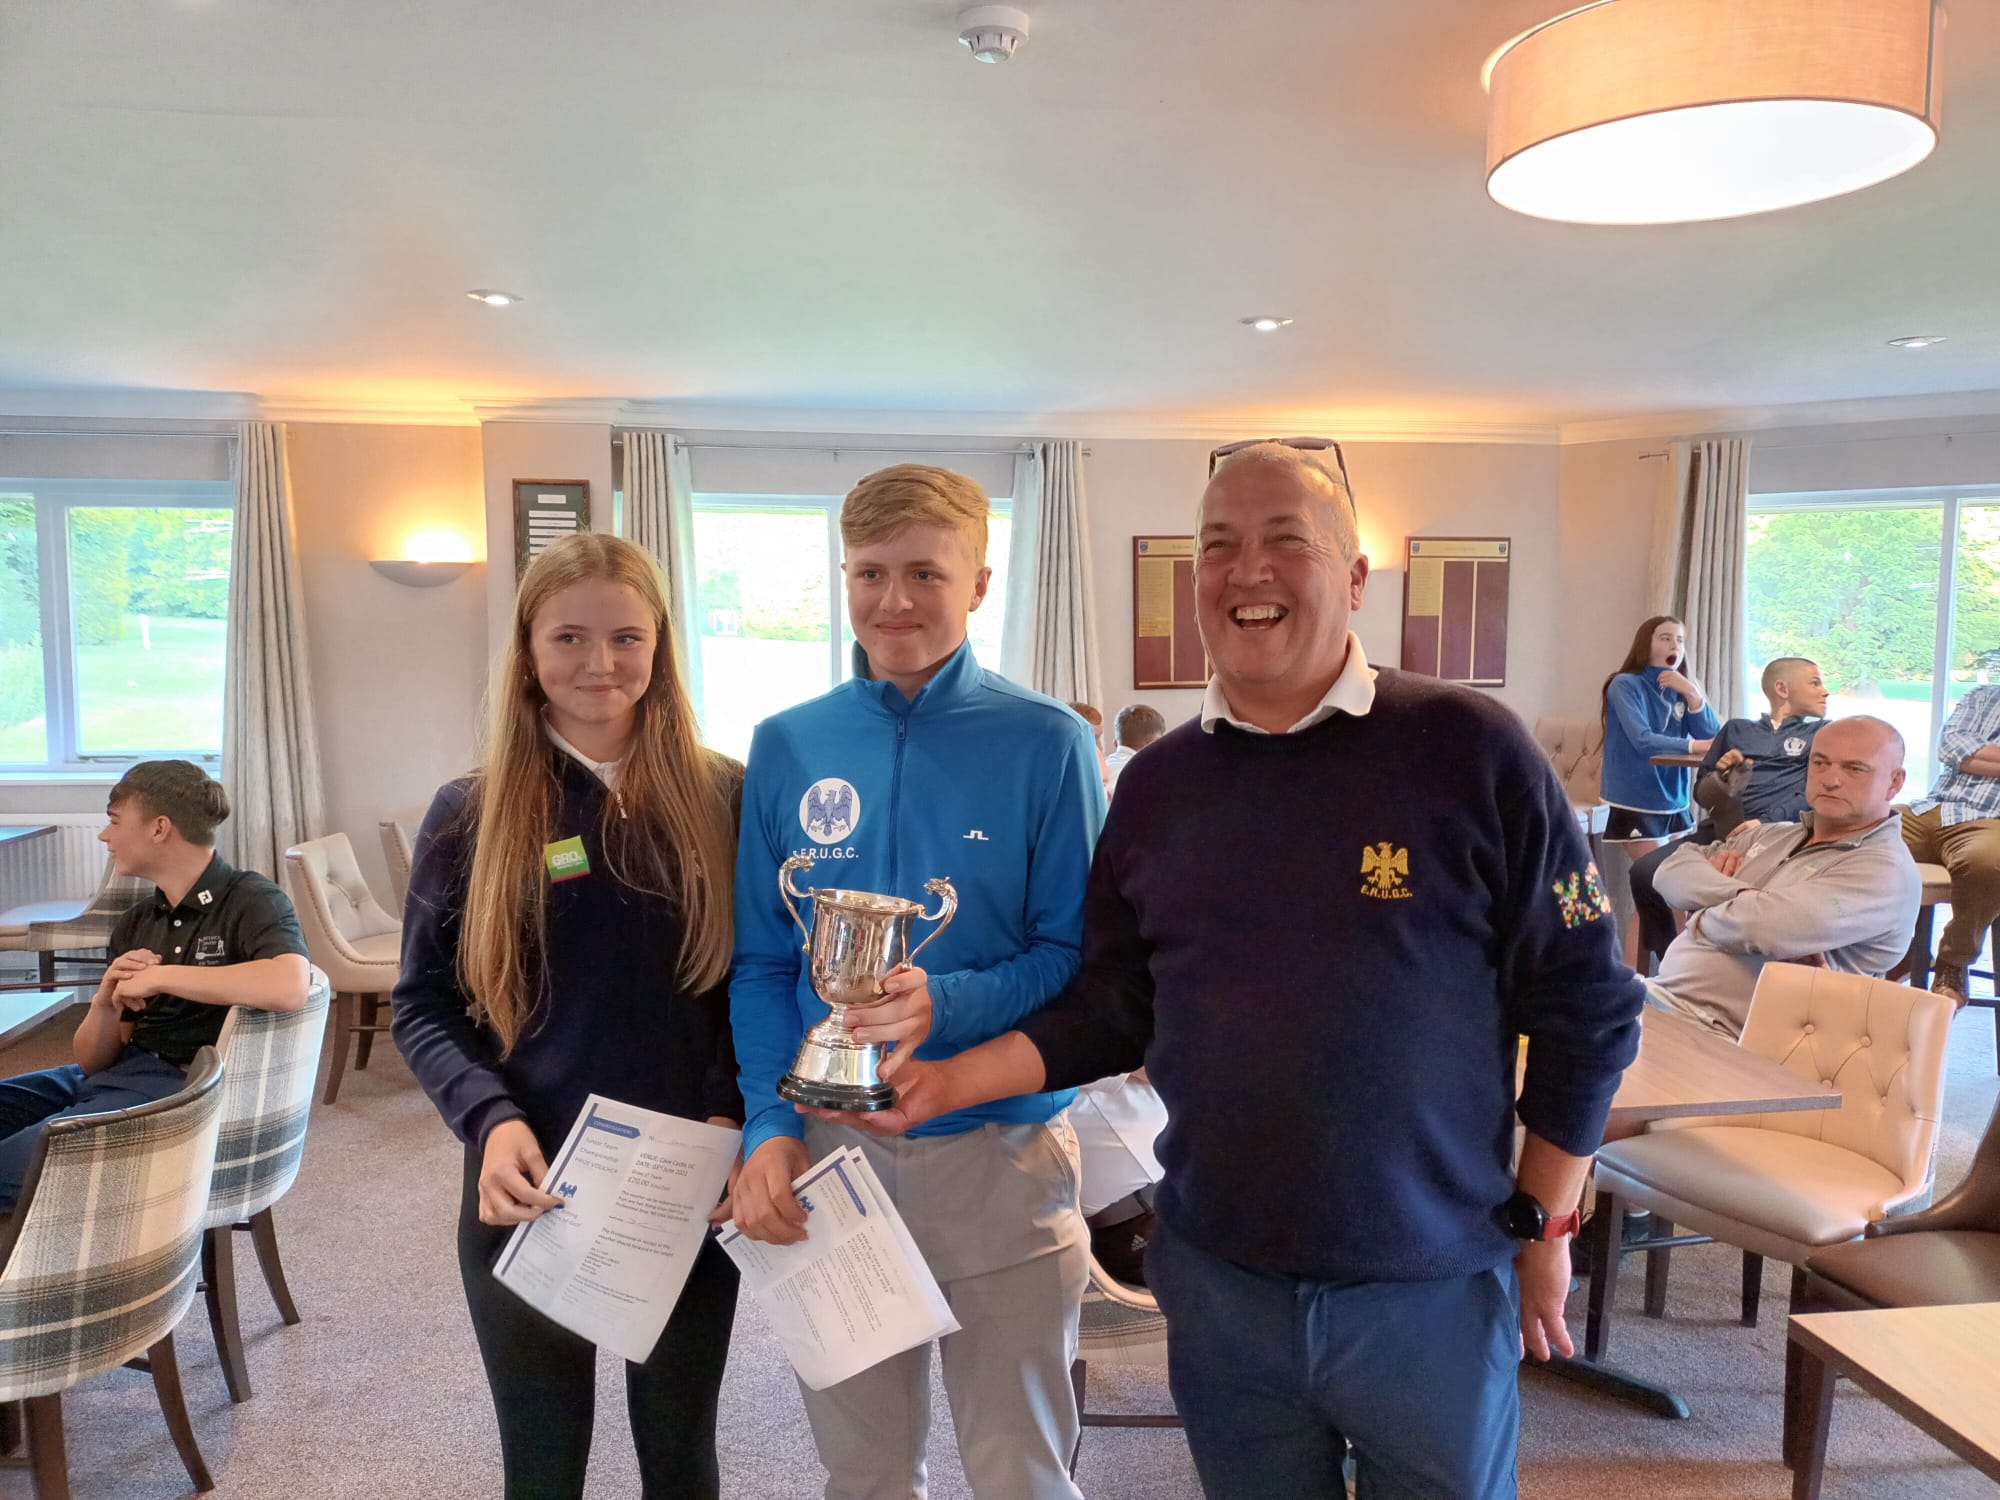 Hessle and Cottingham rise to the top in Junior Club Team Championship